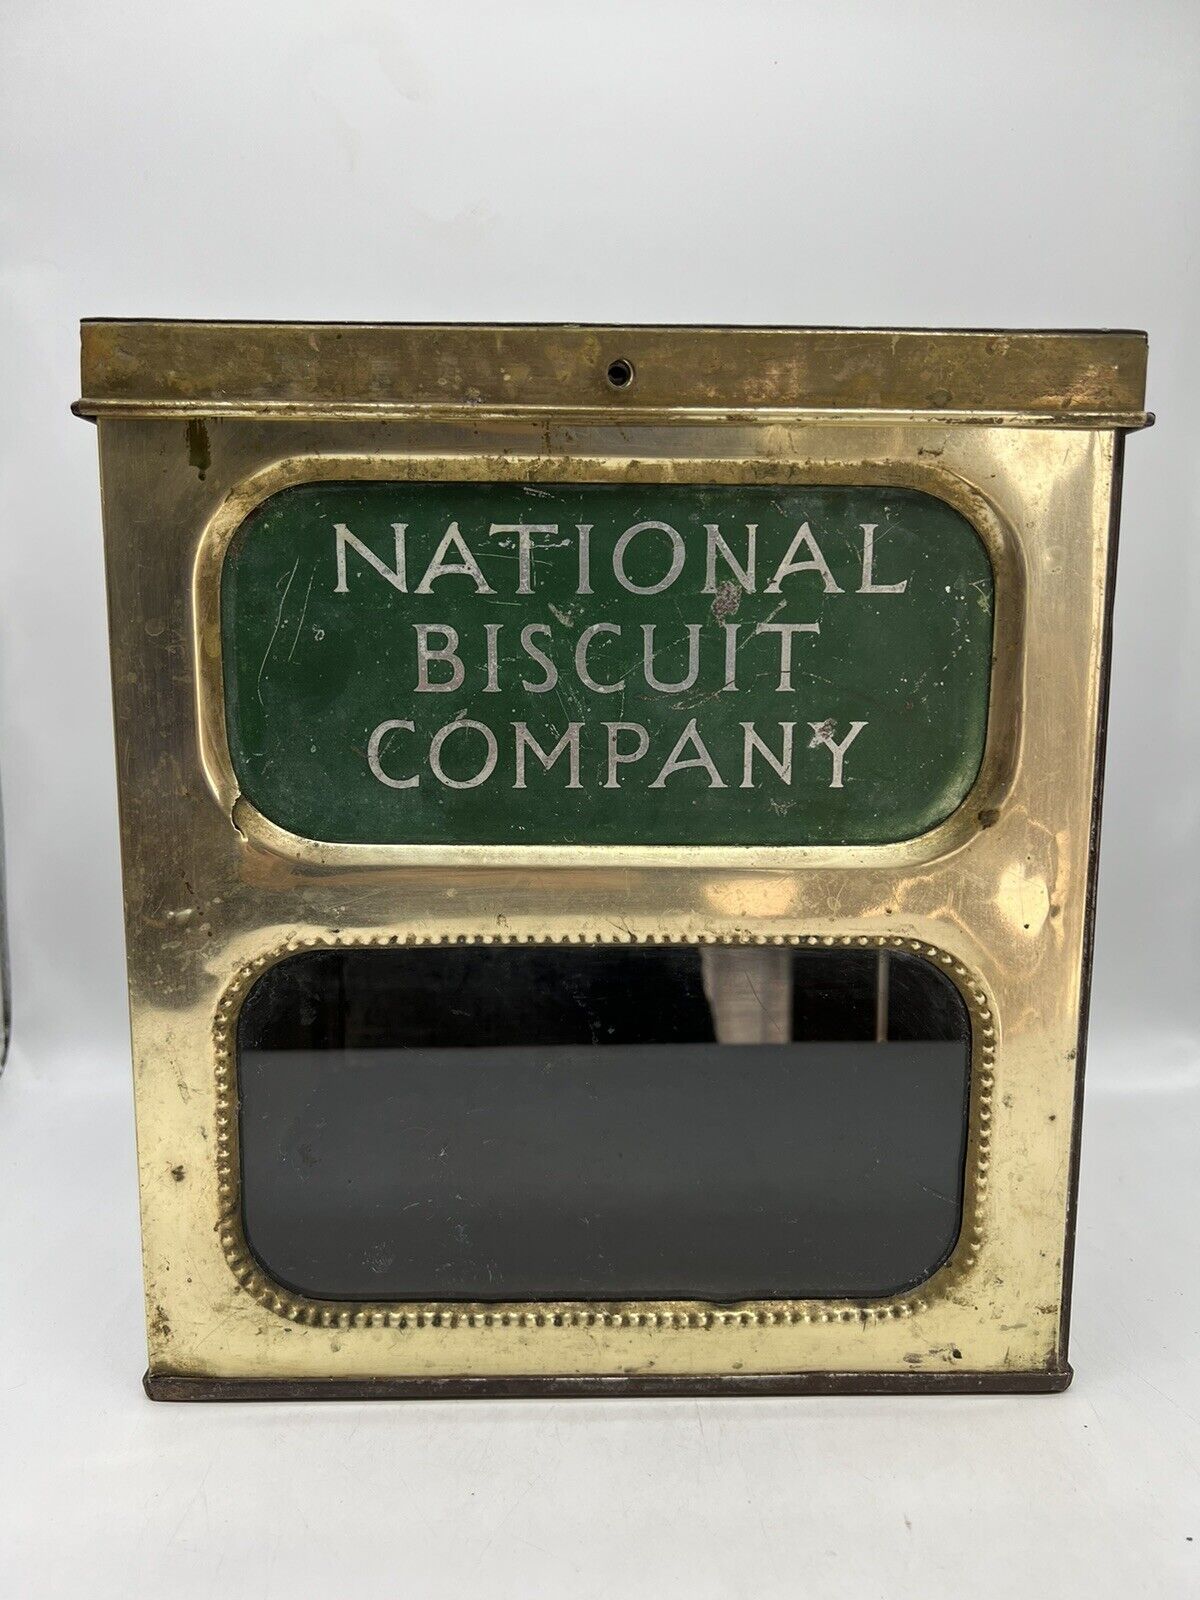 Nabisco National Biscuit Company General Store Display Antique